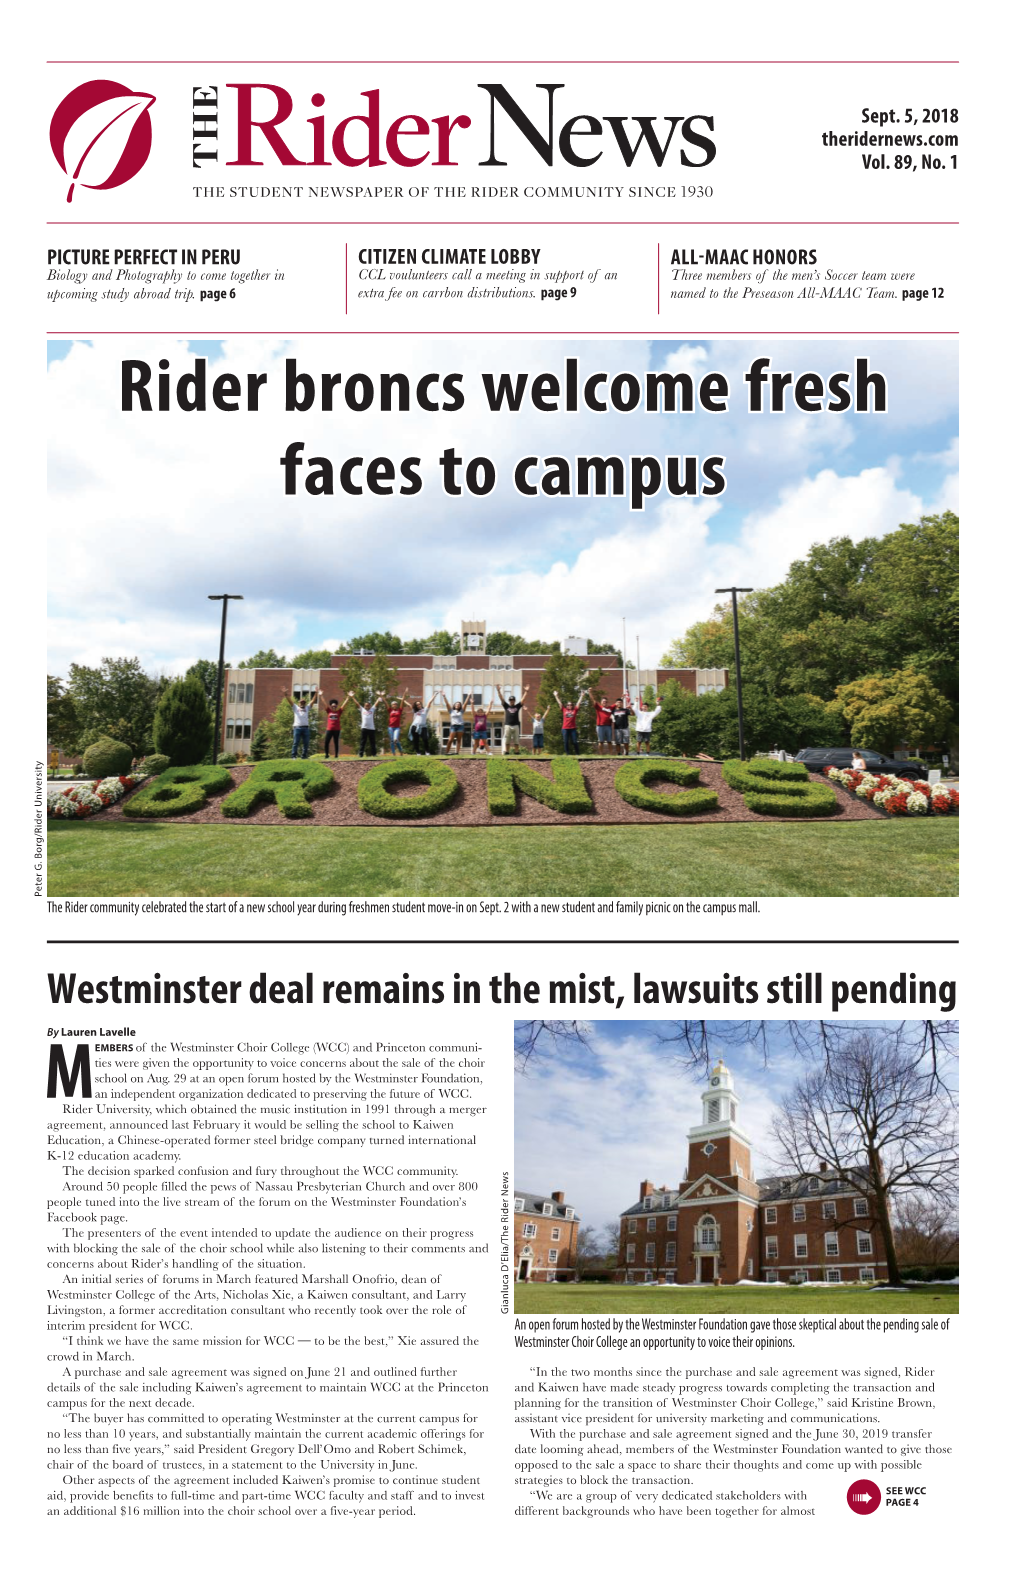 Rider Broncs Welcome Fresh Faces to Campus